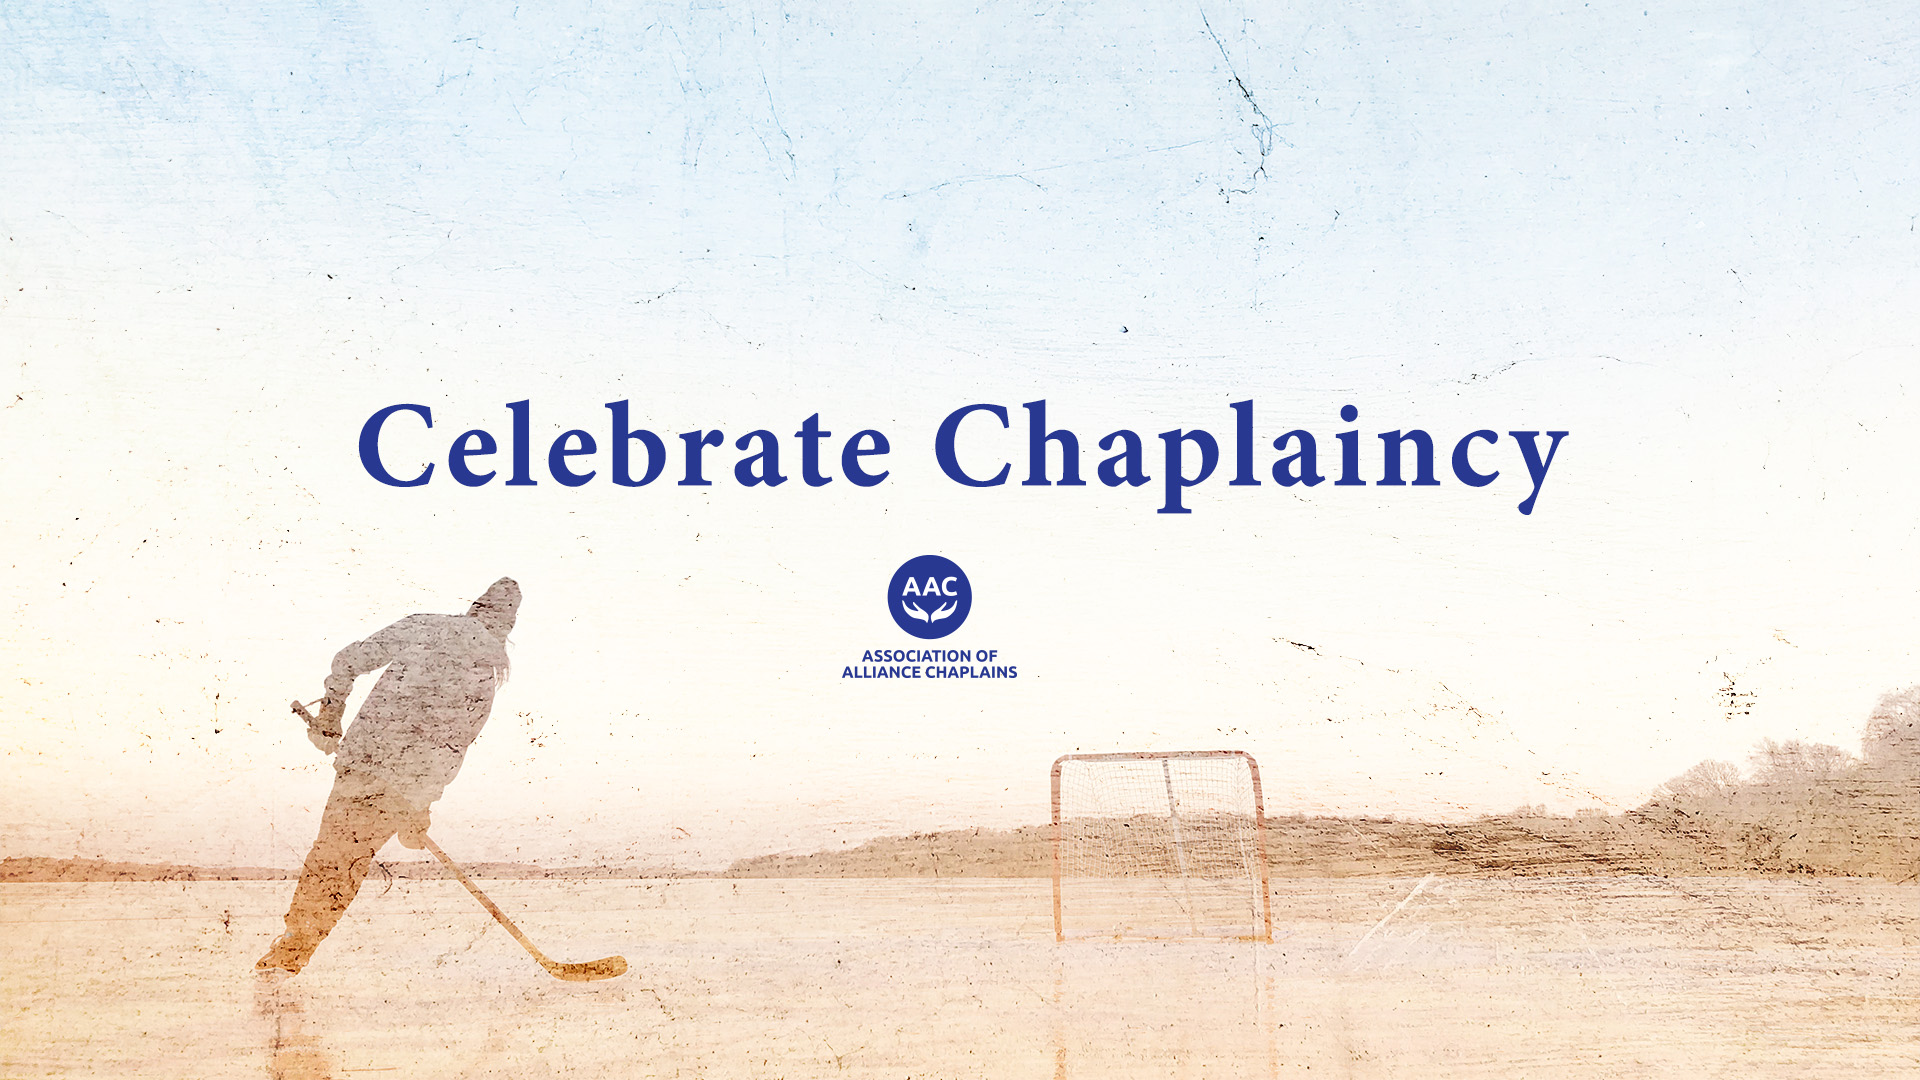 Featured image for “Celebrate Chaplaincy”